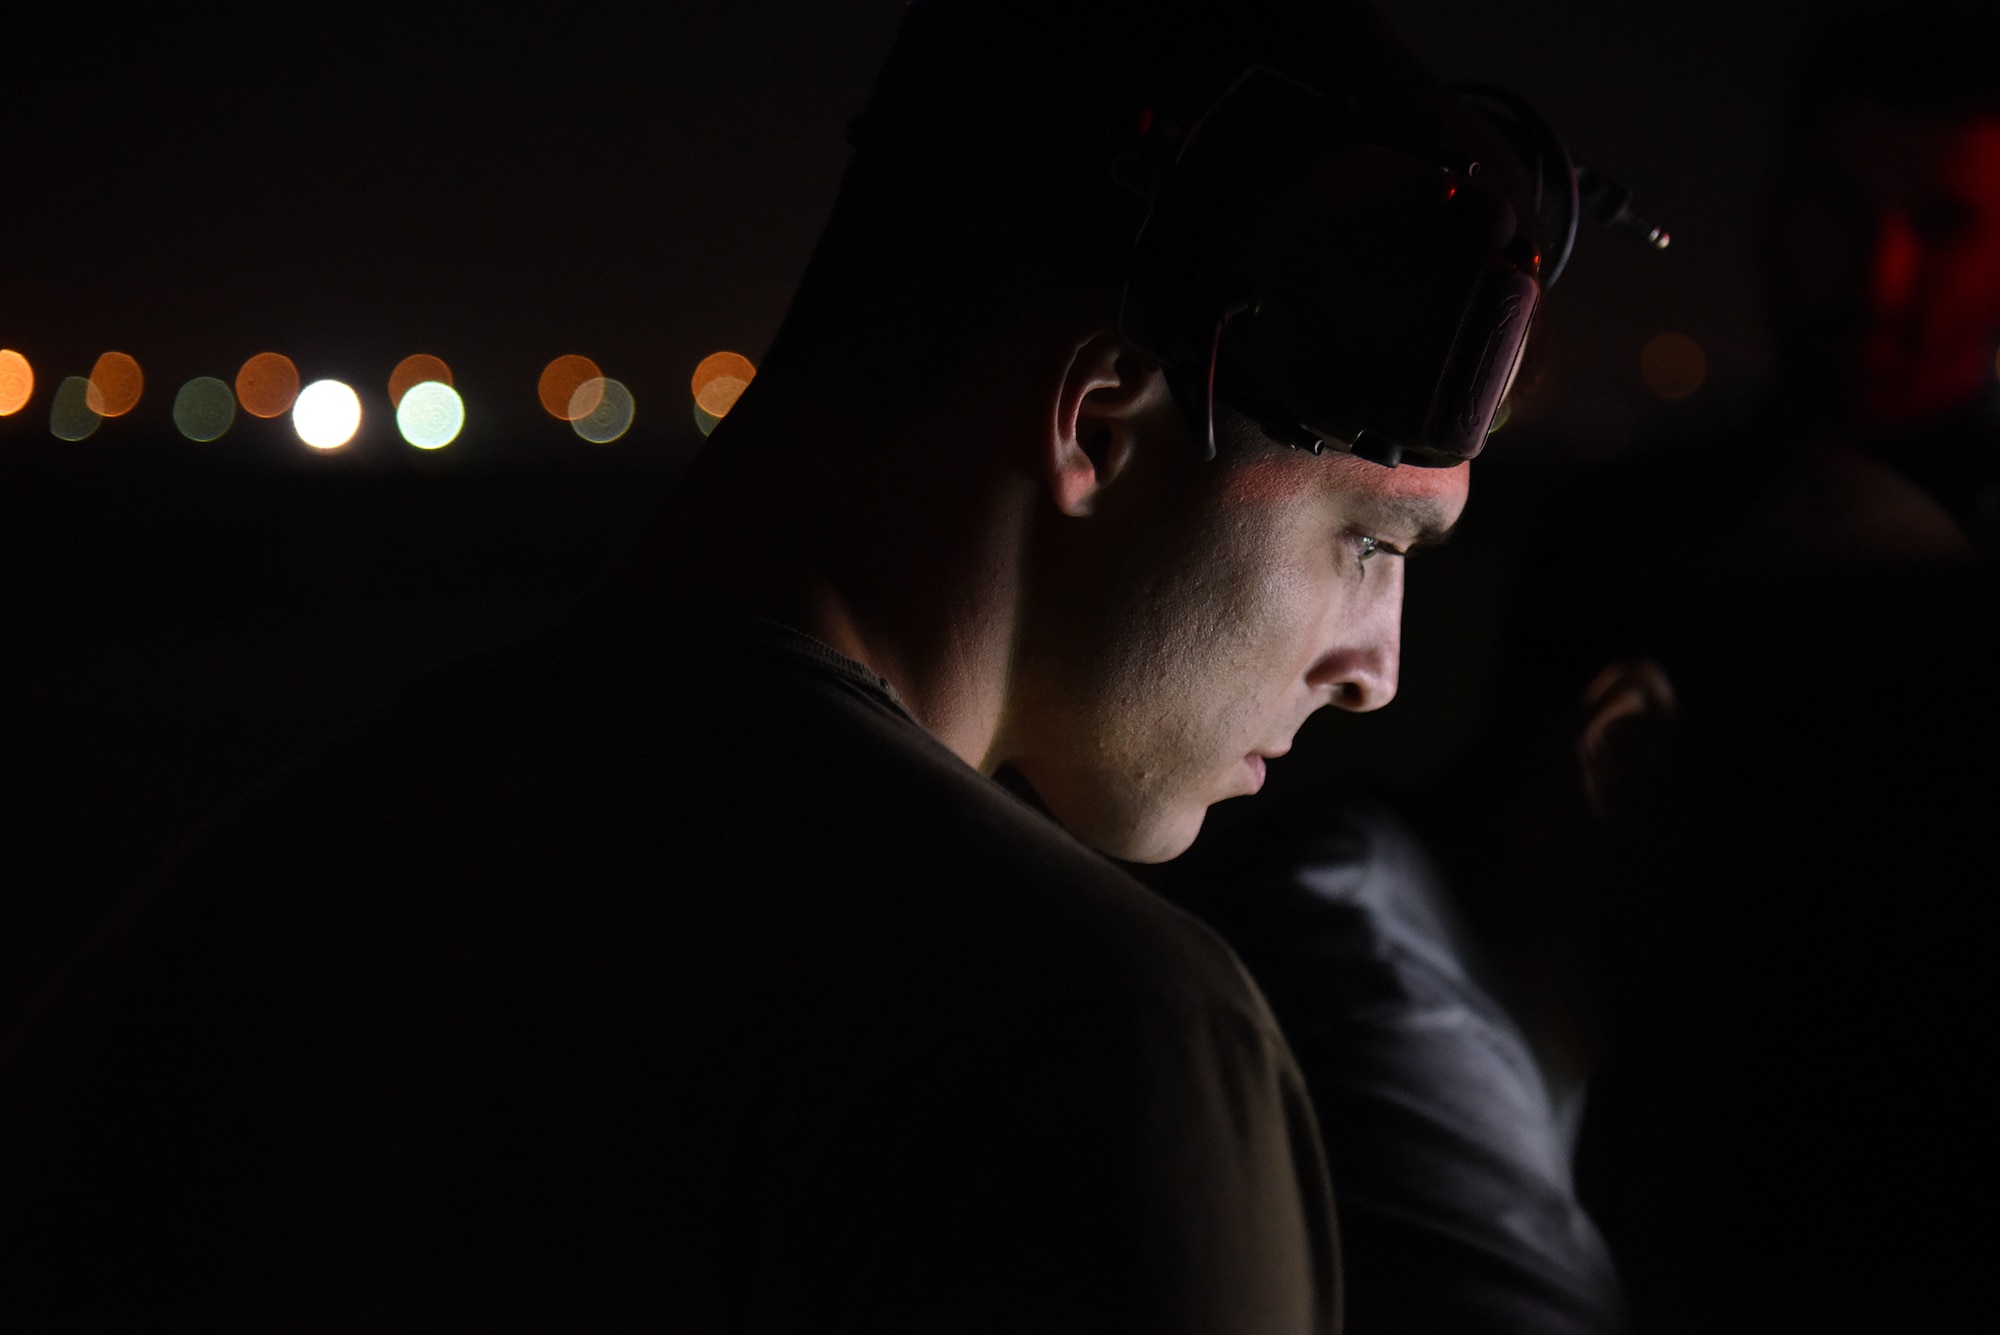 U.S. Air Force Staff Sgt. Gage Robinson, Multi-Capable Airman Team 1 member, looks over a pre-flight checklist during the Operation Agile Spartan 4 exercise at Al Dhafra Air Base, United Arab Emirates, March 10, 2023. Multi-Capable Airman training reduces the number of people who must be put in harm’s way to generate airpower relative to traditional manning models. (U.S. Air Force photo by Tech. Sgt. Chris Jacobs/released)